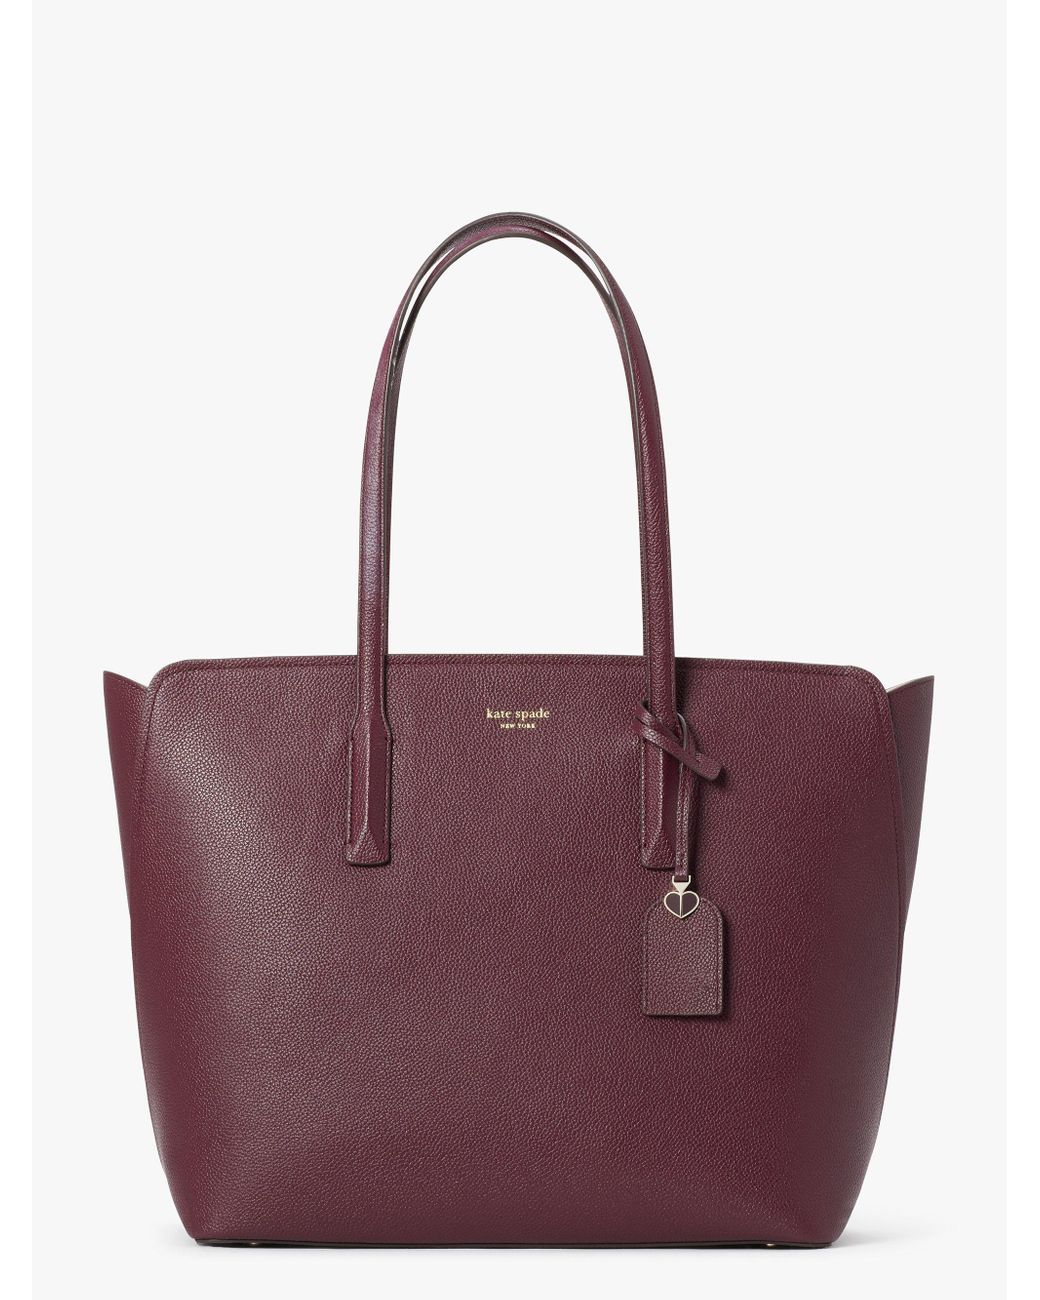 Kate Spade Leather Margaux Large Tote in Deep Cherry (Purple) | Lyst